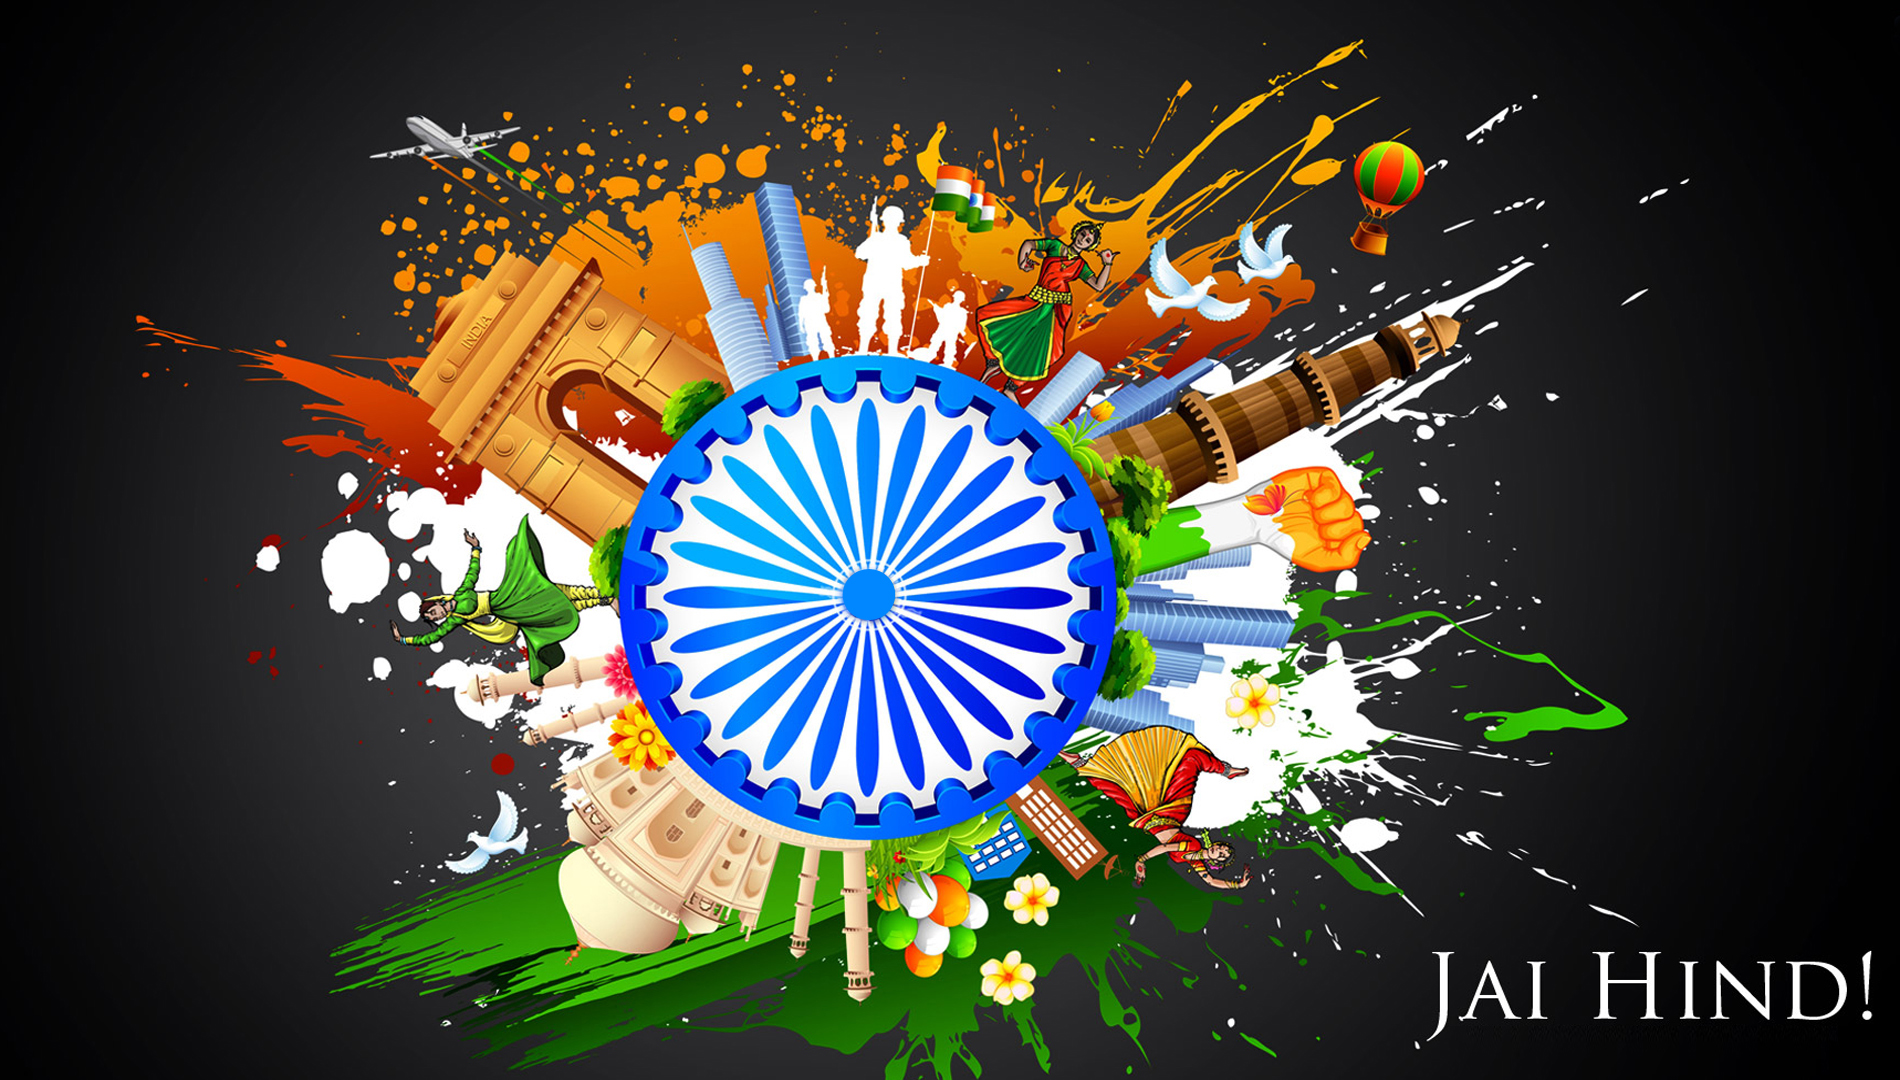 Free} Independence Day 2020 wishes HD wallpaper Download